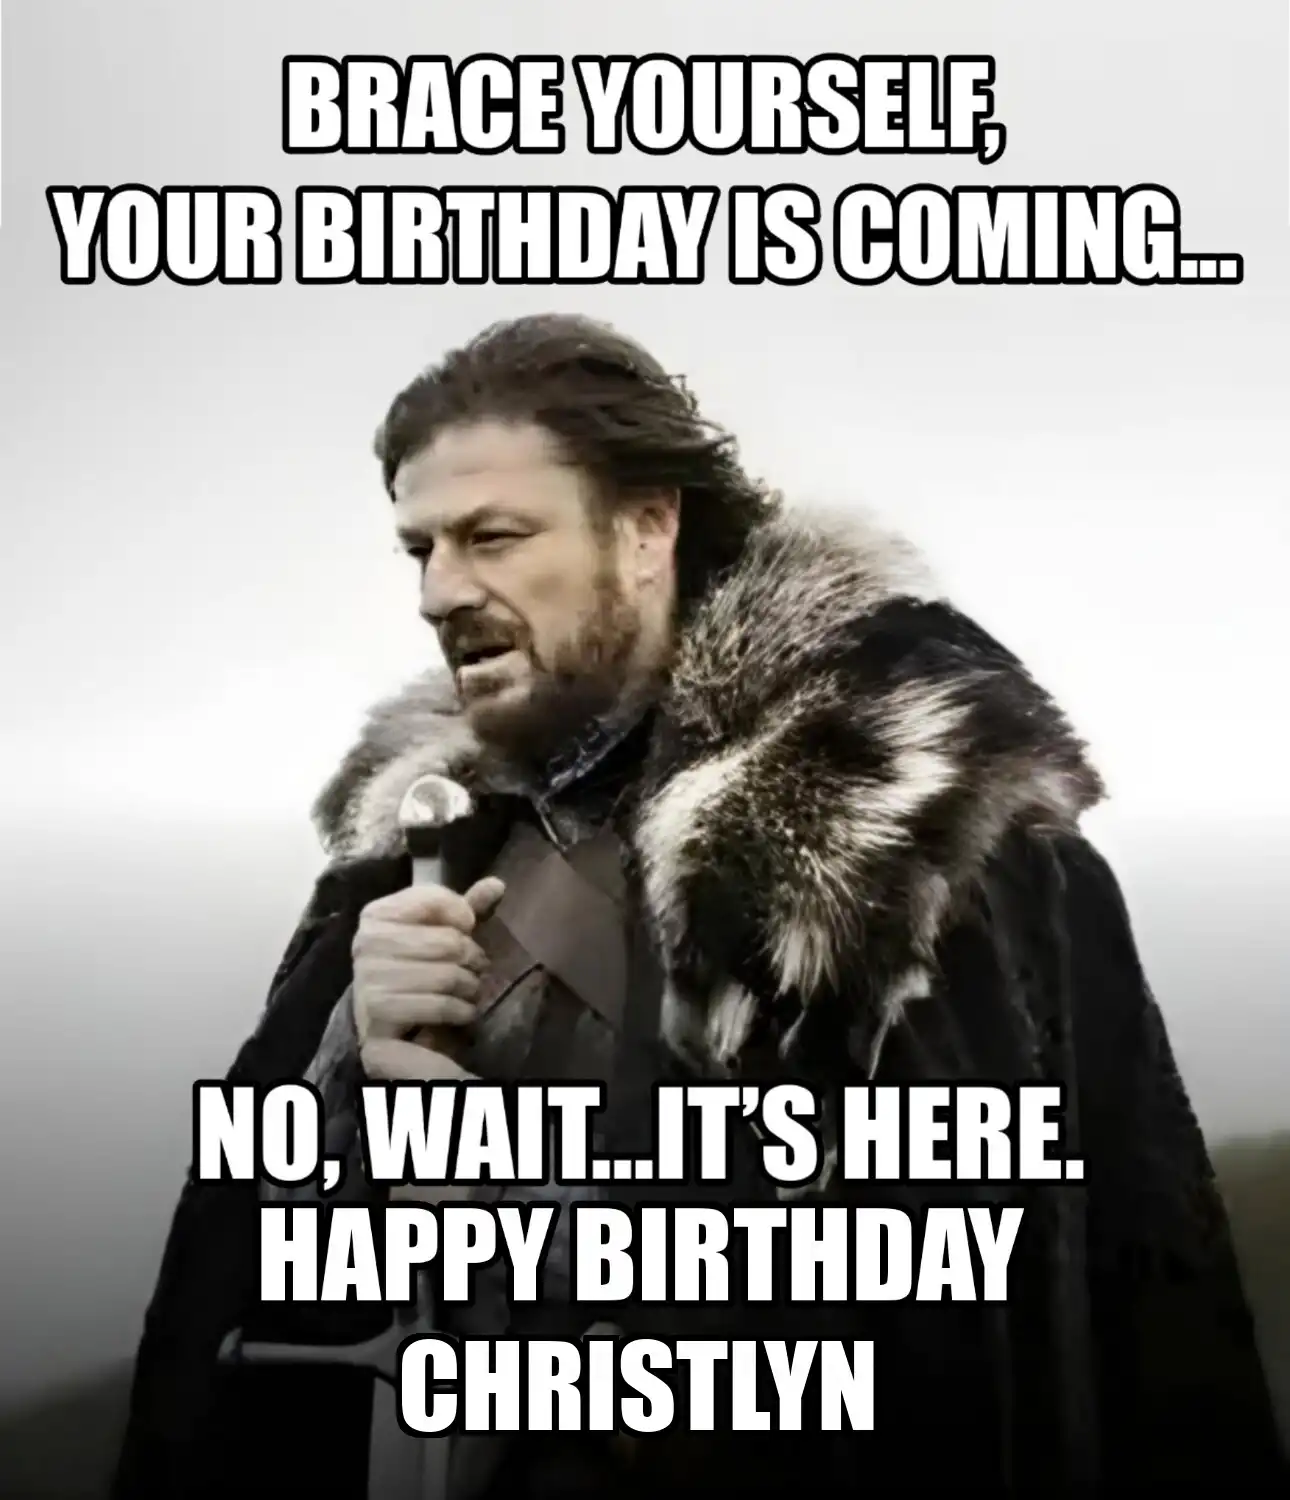 Happy Birthday Christlyn Brace Yourself Your Birthday Is Coming Meme